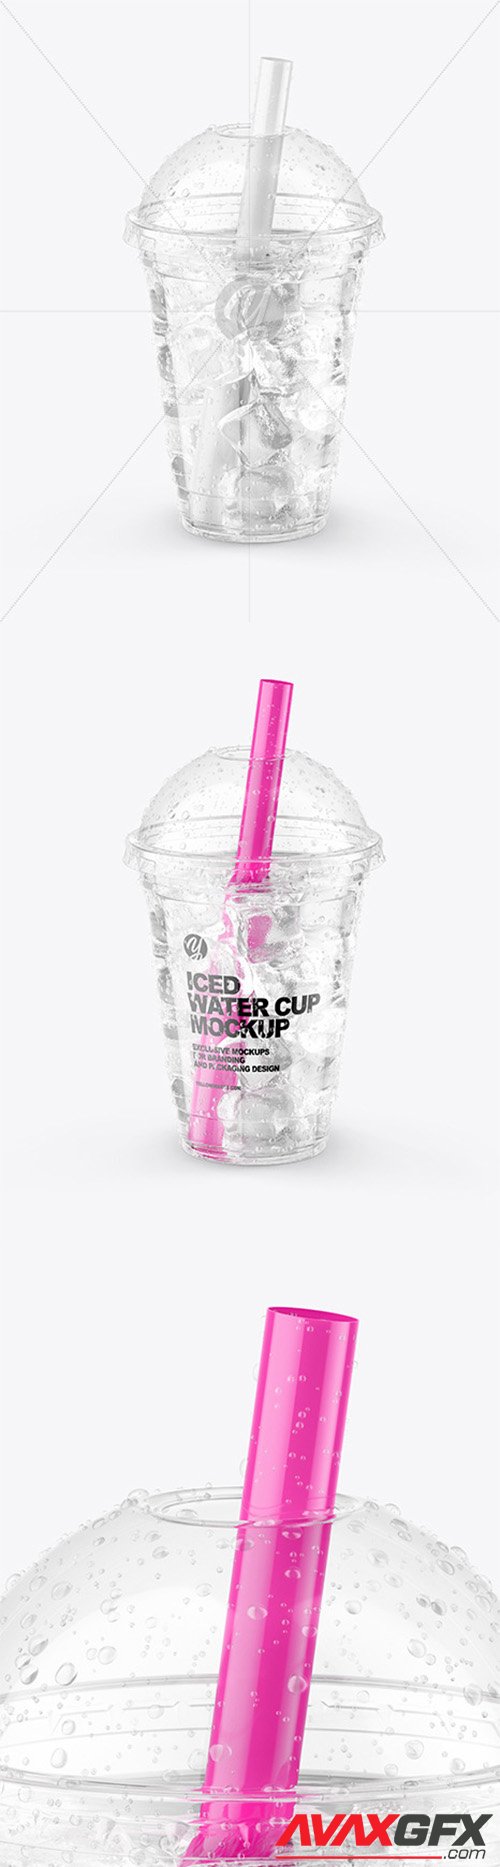 Download 11 Glossy Plastic Soda Cup With Ice Branding Mockups Yellowimages Mockups